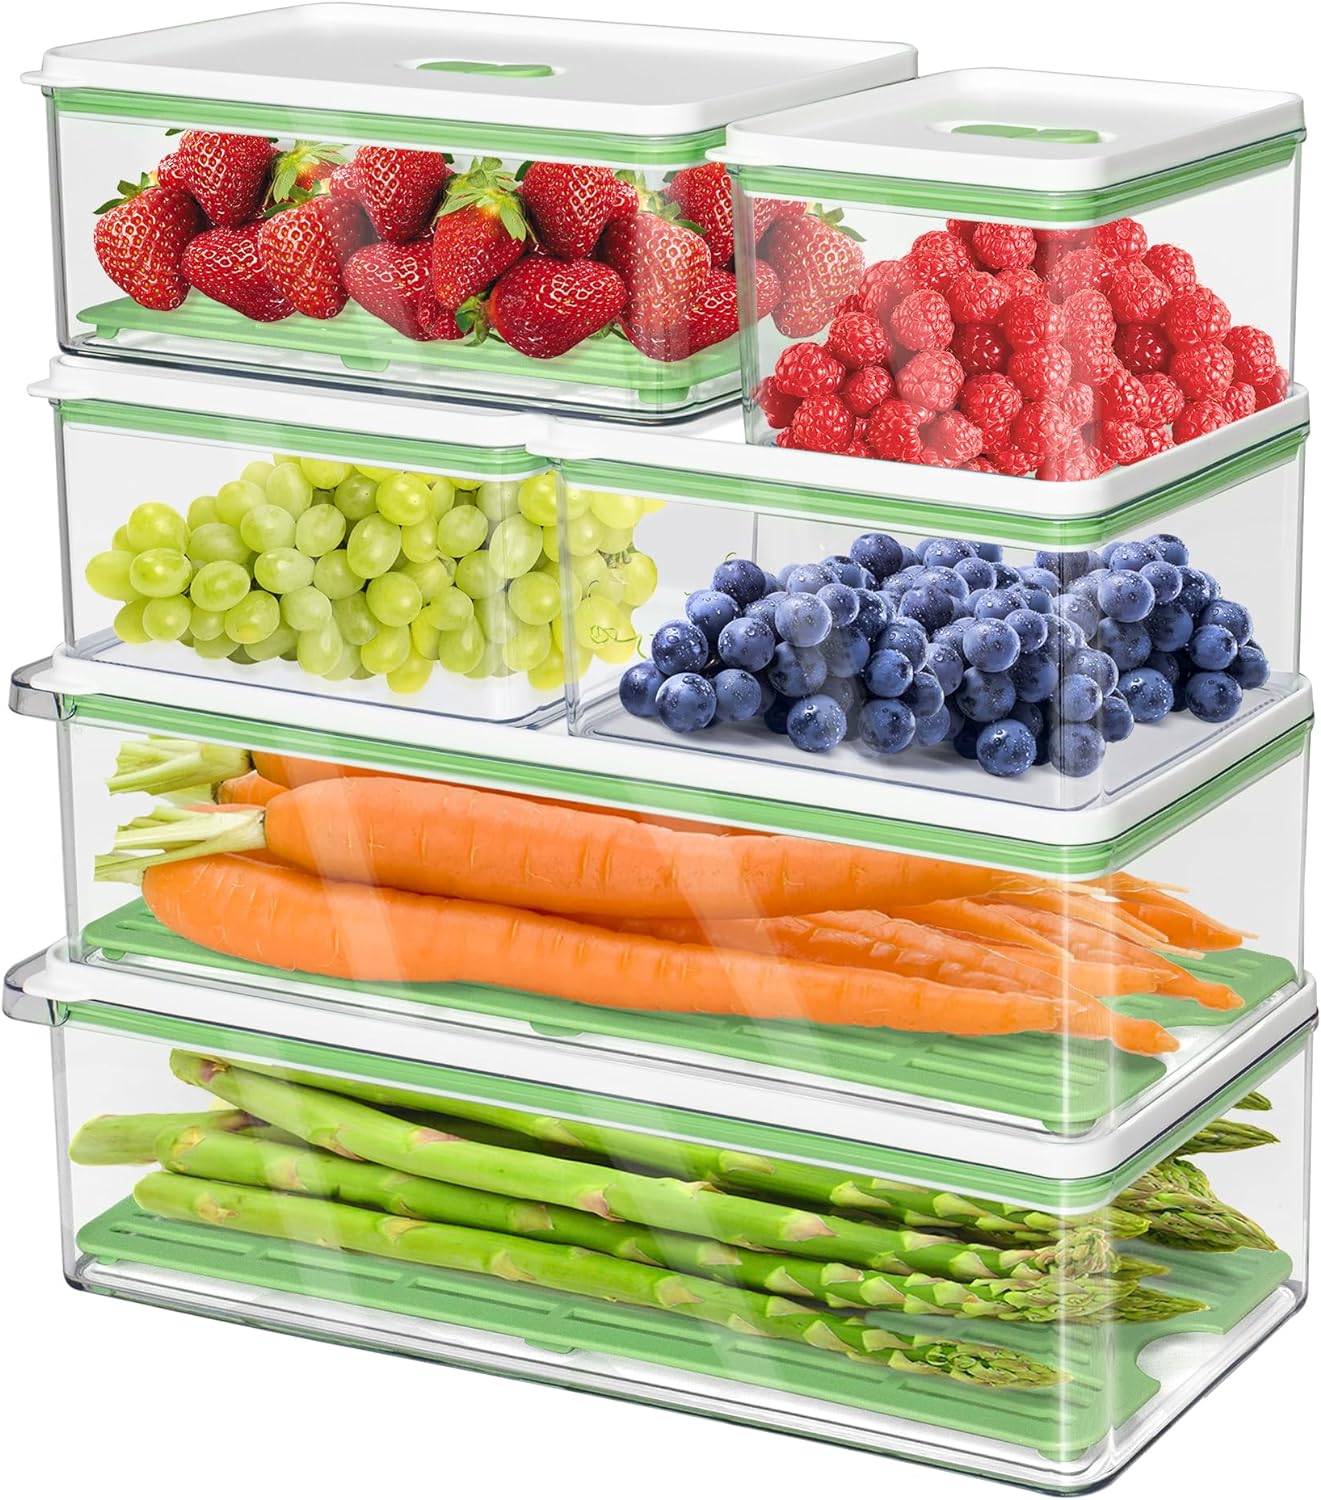 MineSign 6Pack Plastic Stackable Food Containers With Vented Lids And Removable Drain Tray Refrigerator Produce Saver Organizer Bins For Fridge Freezer Fruits&Veggie Storage Kitchen Organization